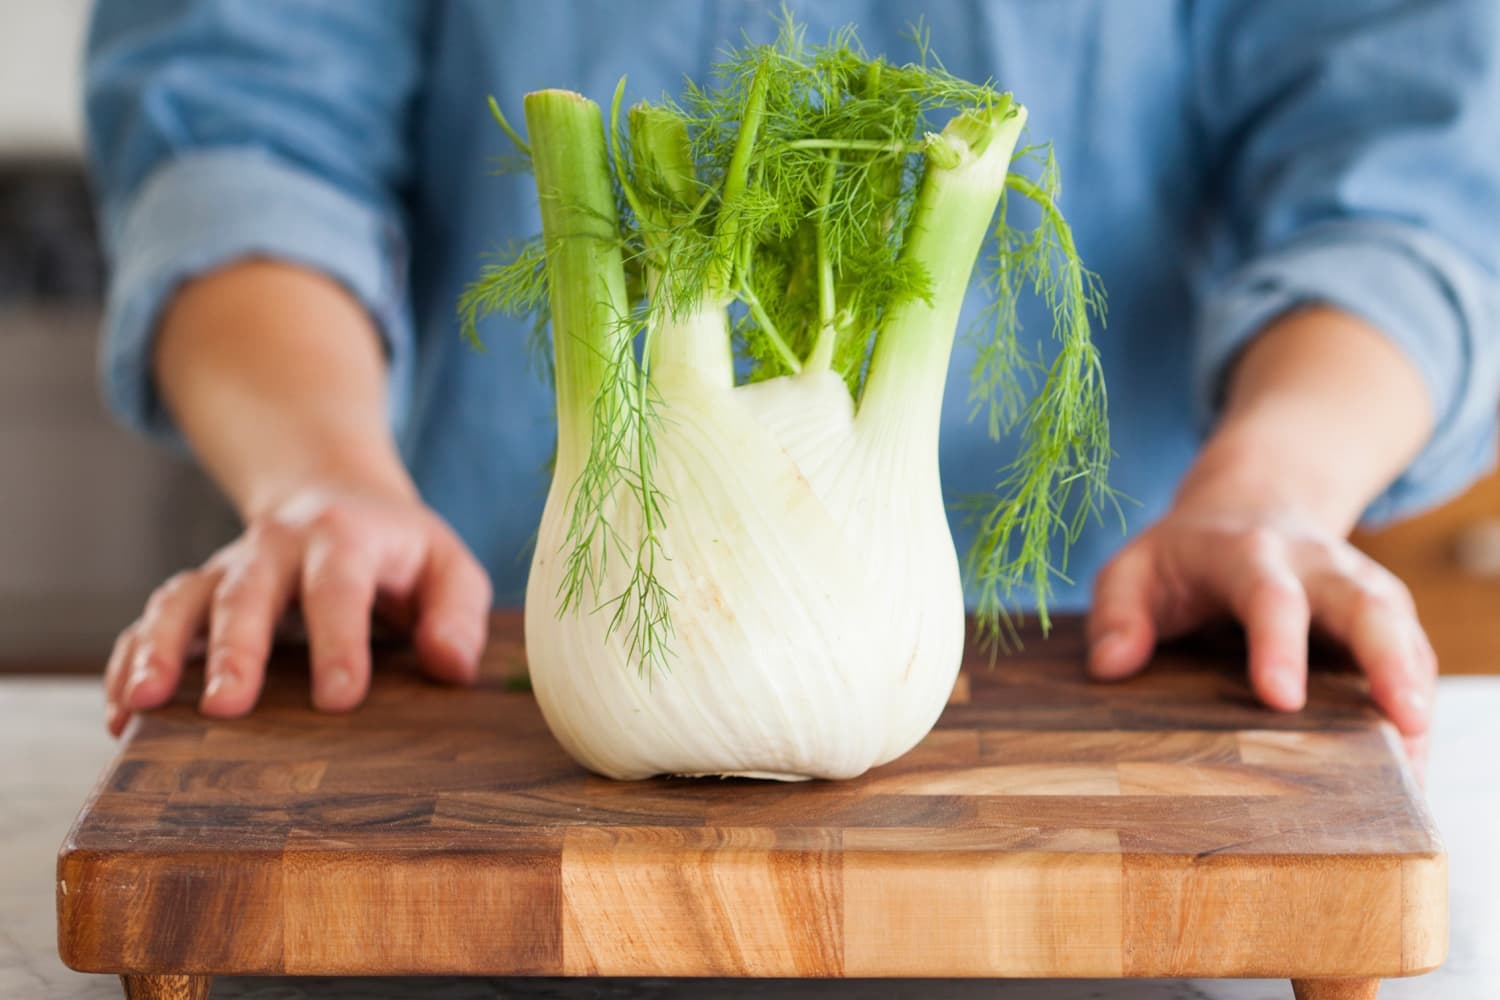 Here’s how to take that hefty bulb of fennel and trim it down into bite-siz...